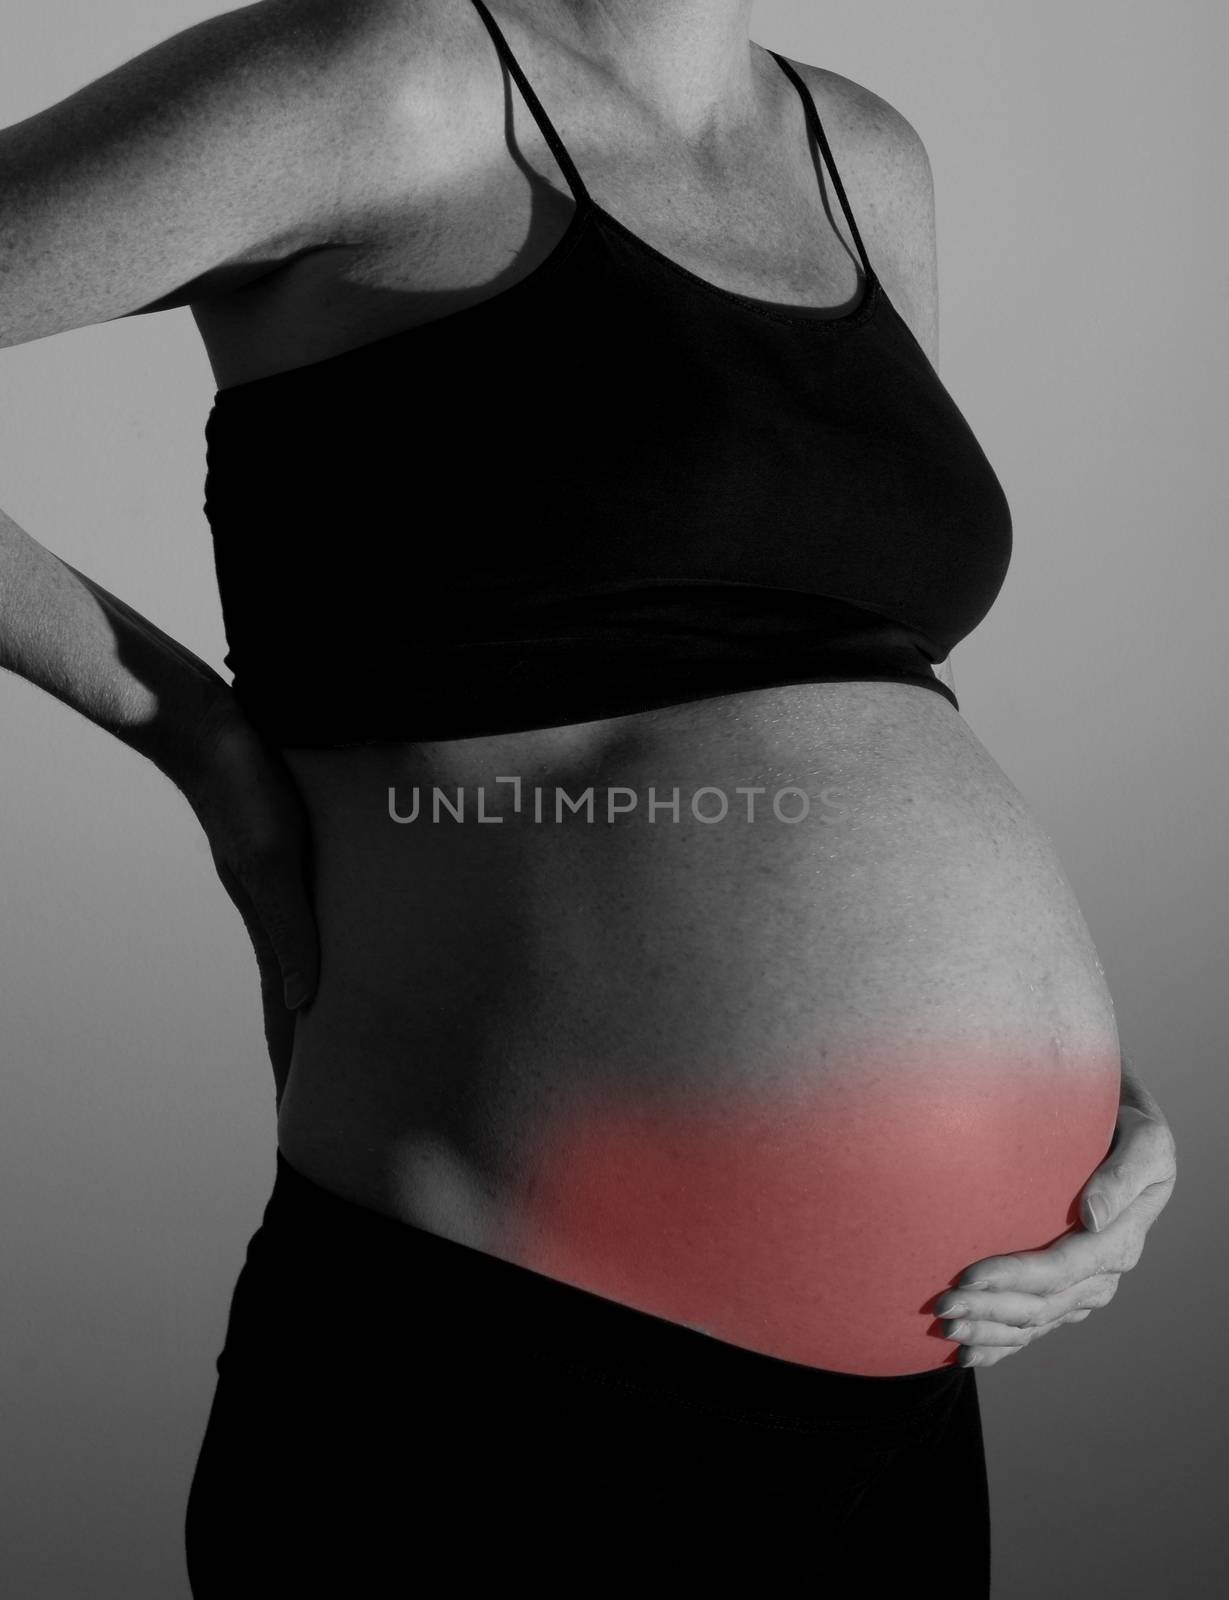 pregnancy, contraction and labor by ftlaudgirl